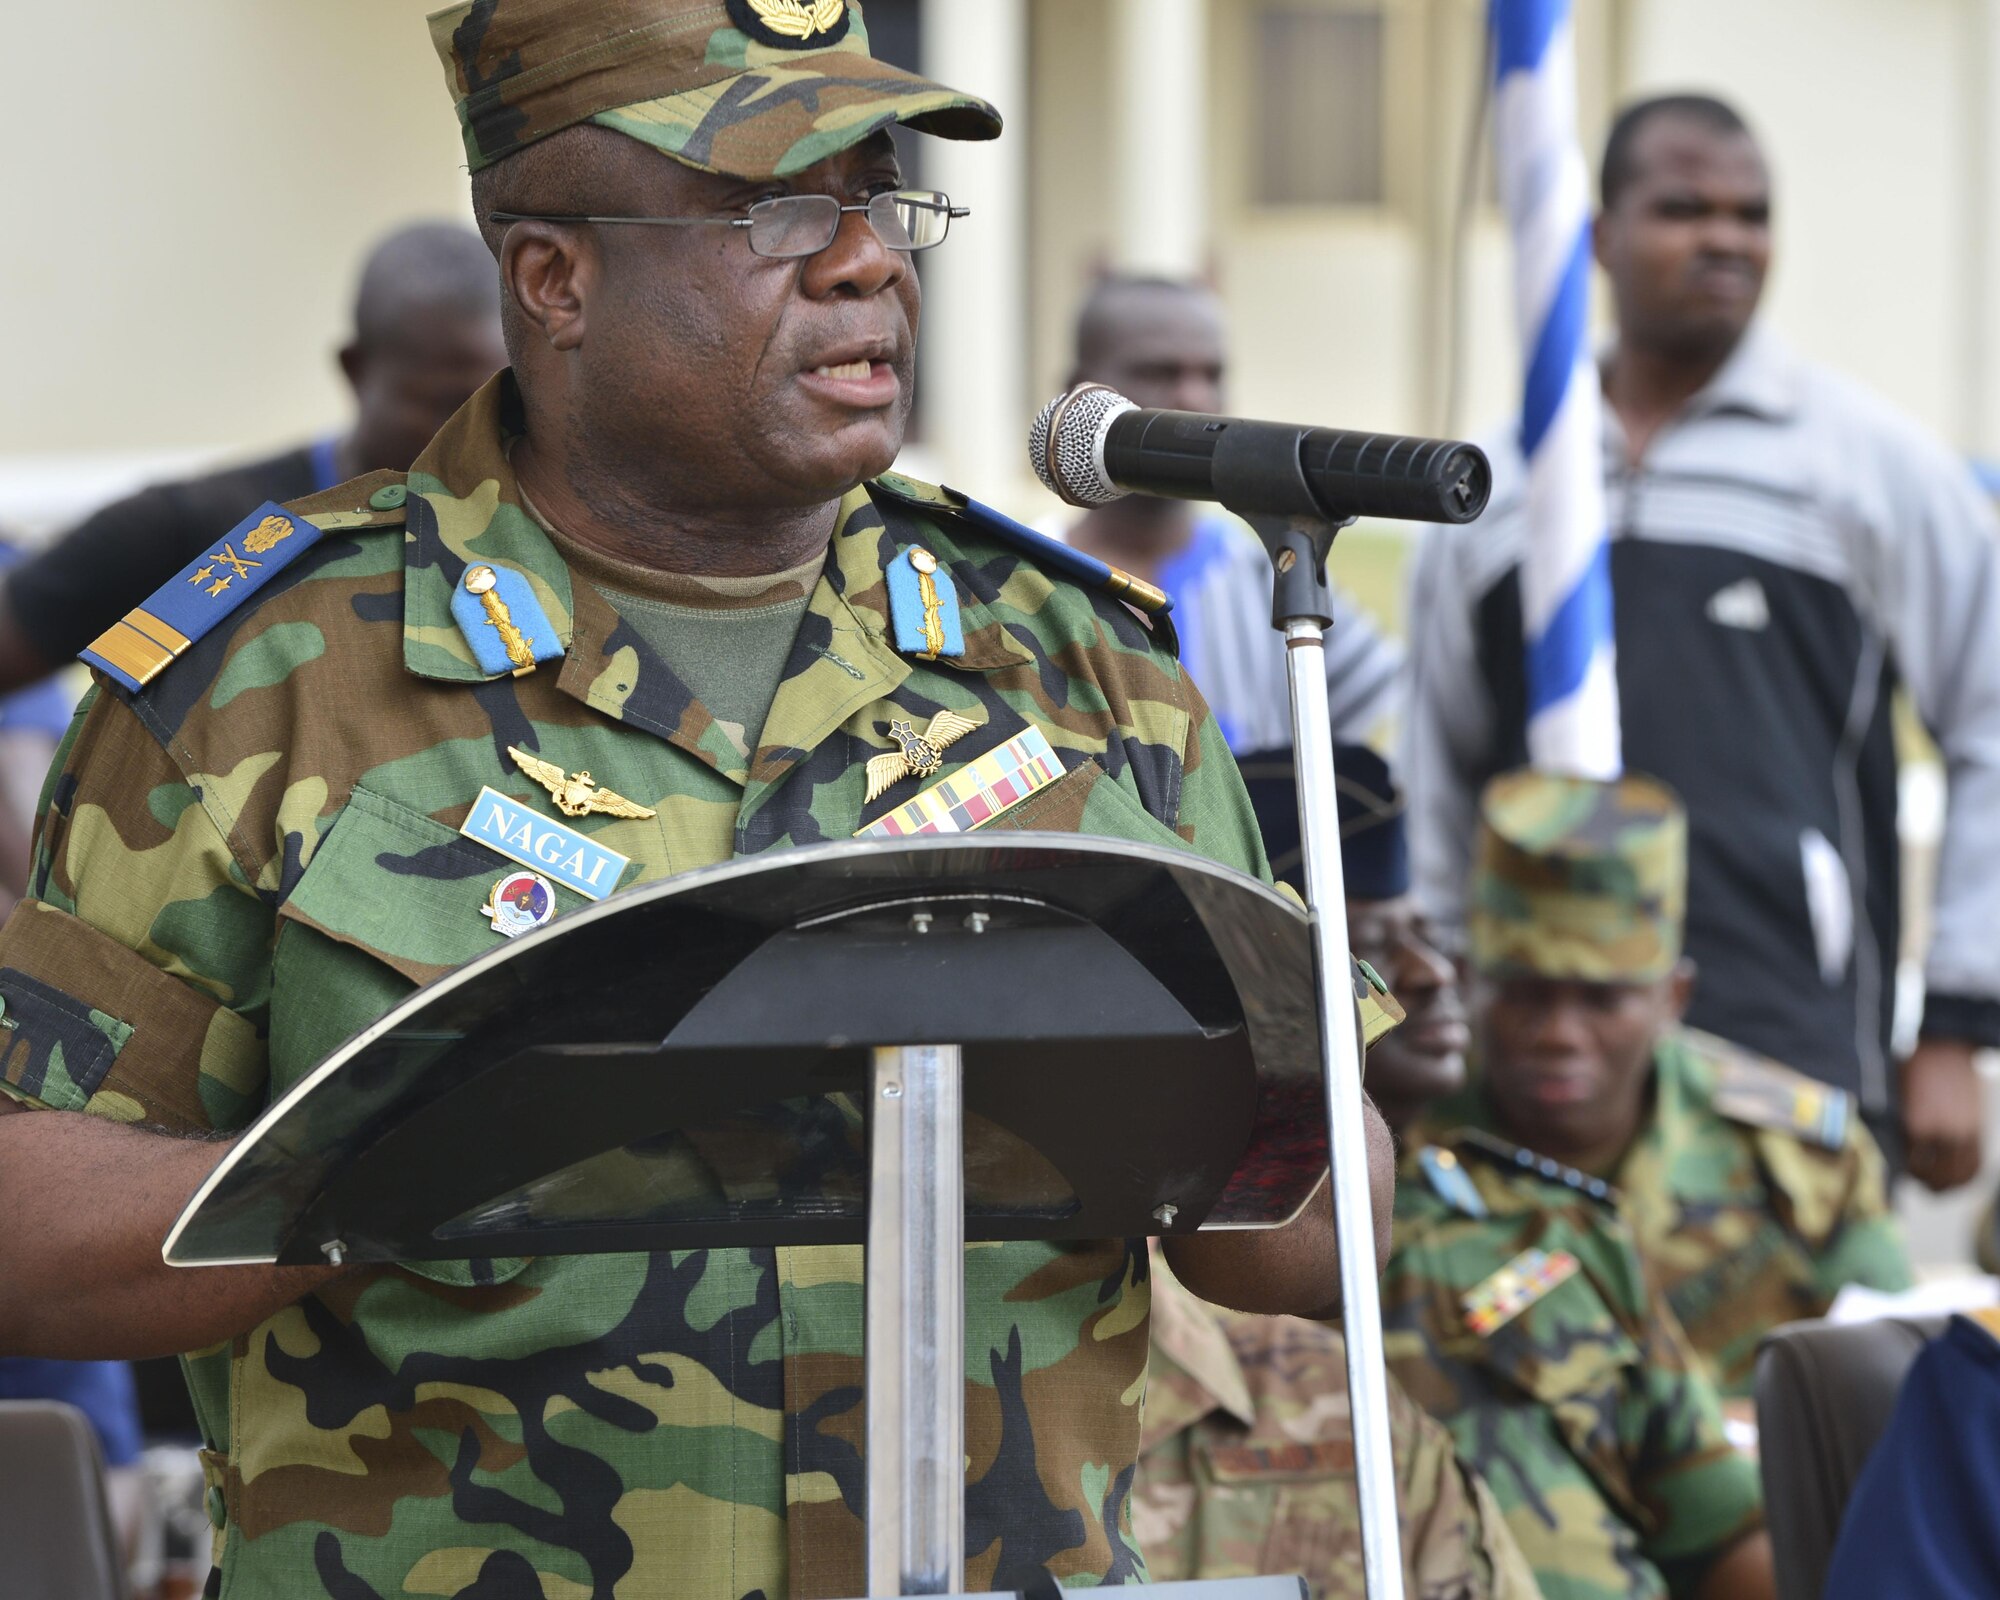 Ghanaian Air Advice Marshal Maxwell Nagai, welcomes African Partnership Flight participates to Accra Air Base, Ghana, during the opening ceremony Sept. 12, 2016. APF is a multi-lateral military-to-military engagement that enhances regional cooperation, increase interoperability and builds aviation capacity. (U.S. Air Force photo by Staff Sgt. Stephanie Longoria)